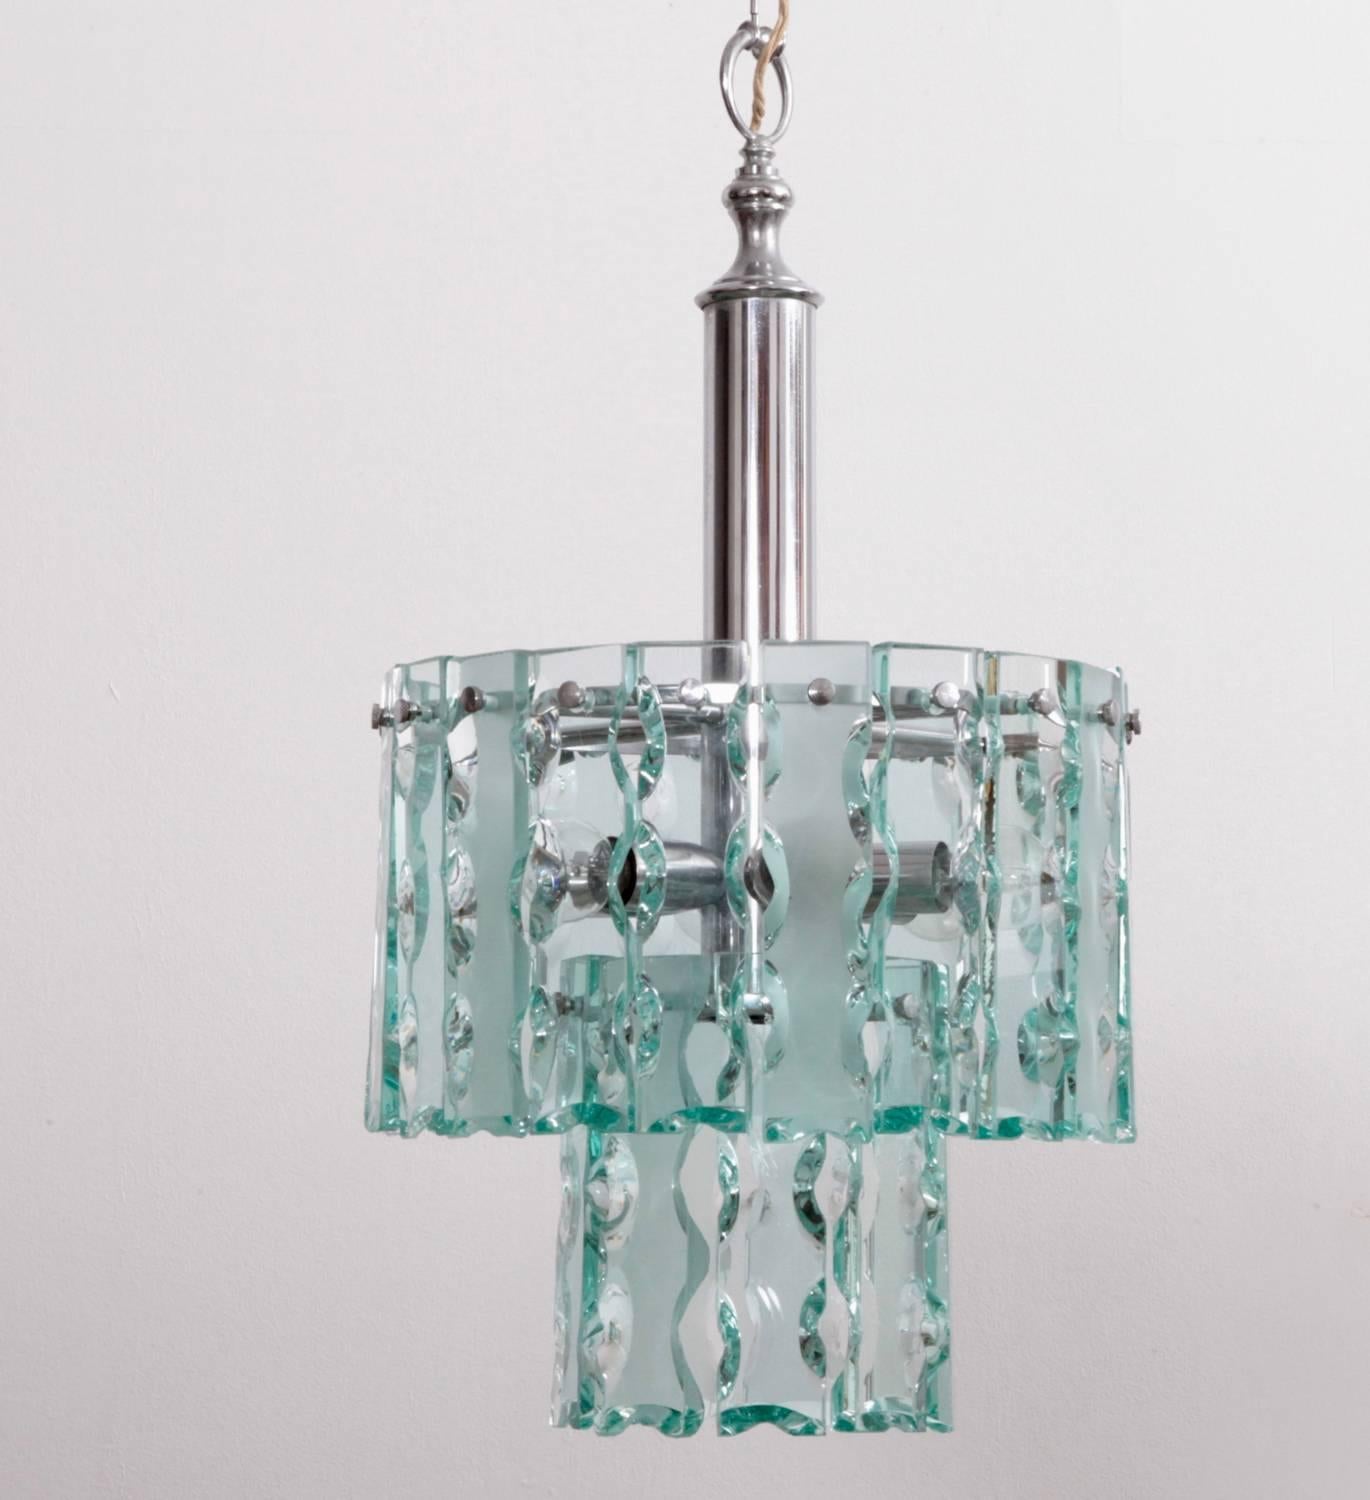 Bold two-tier Fontana Arte style chandelier which consists of 36 thick slabs of clear glass and flat glass on chromed hardware. Each slab is hand-cut and hand-chipped - a radical physical break away from traditional crystal glass making. Six E14 and